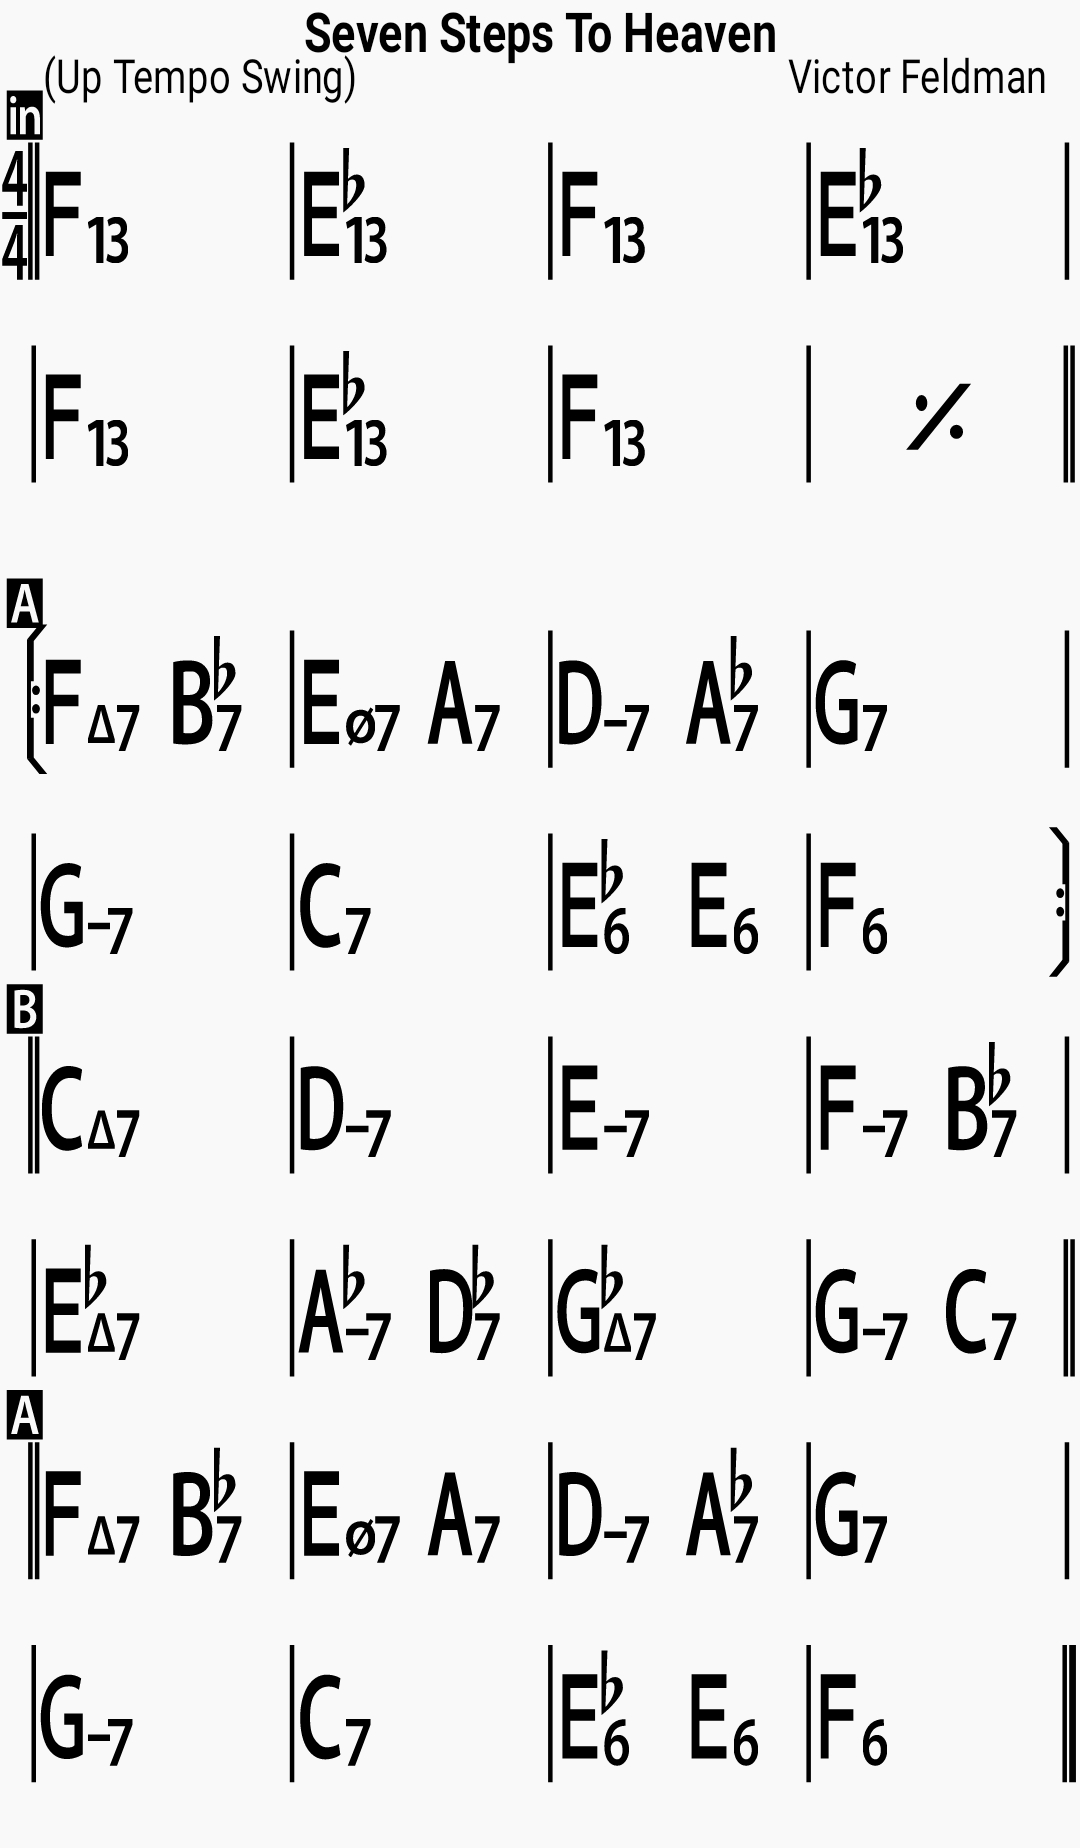 Chord chart for the jazz standard Seven Steps To Heaven